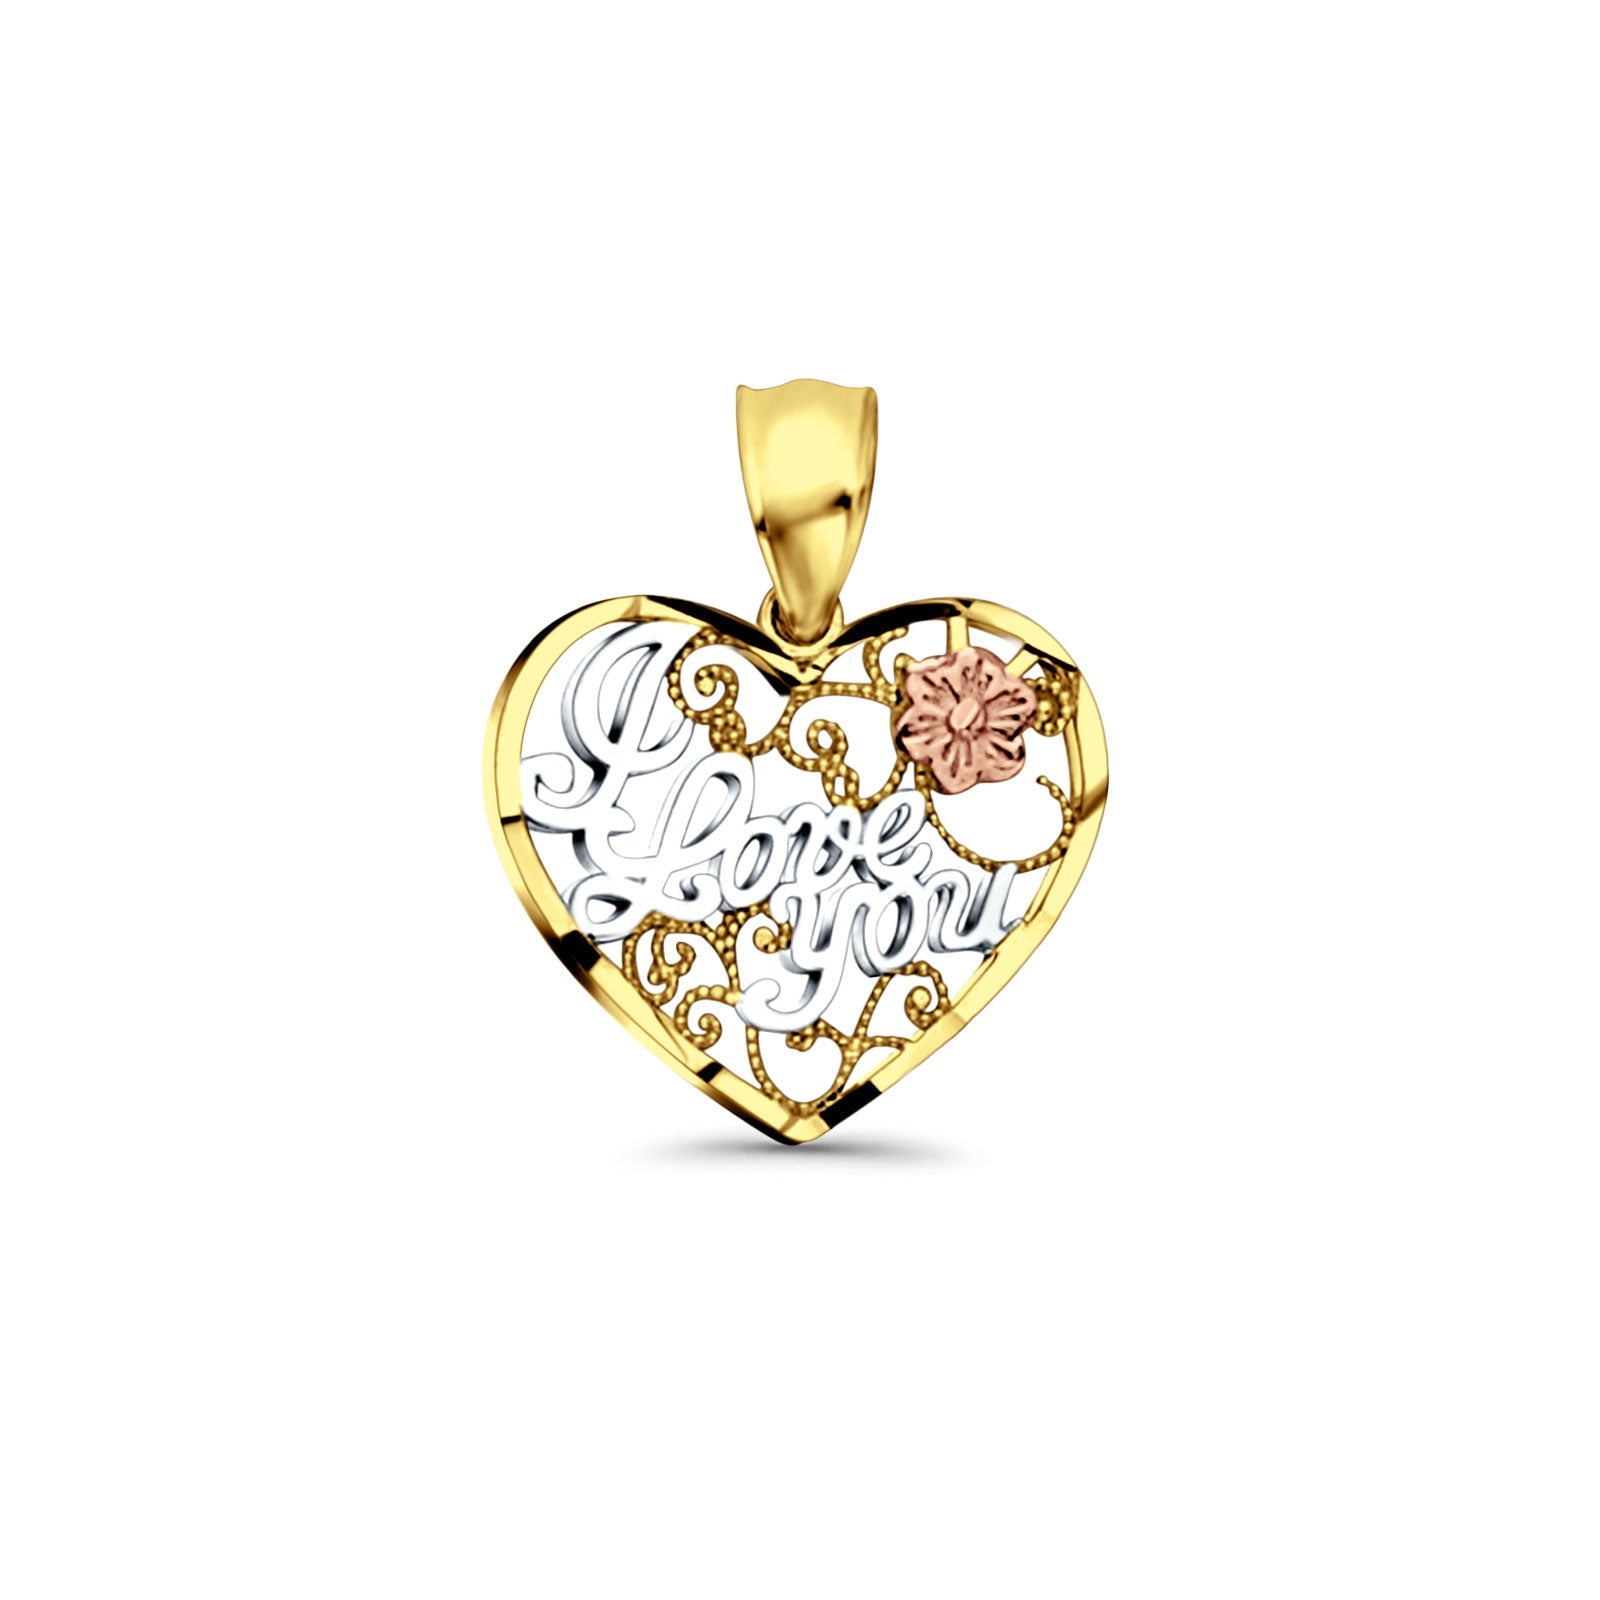 14K Tri Color Gold I Love You Pendant 20mmX15mm With 16 Inch To 24 Inch 1.1MM Width Wheat Chain Necklace